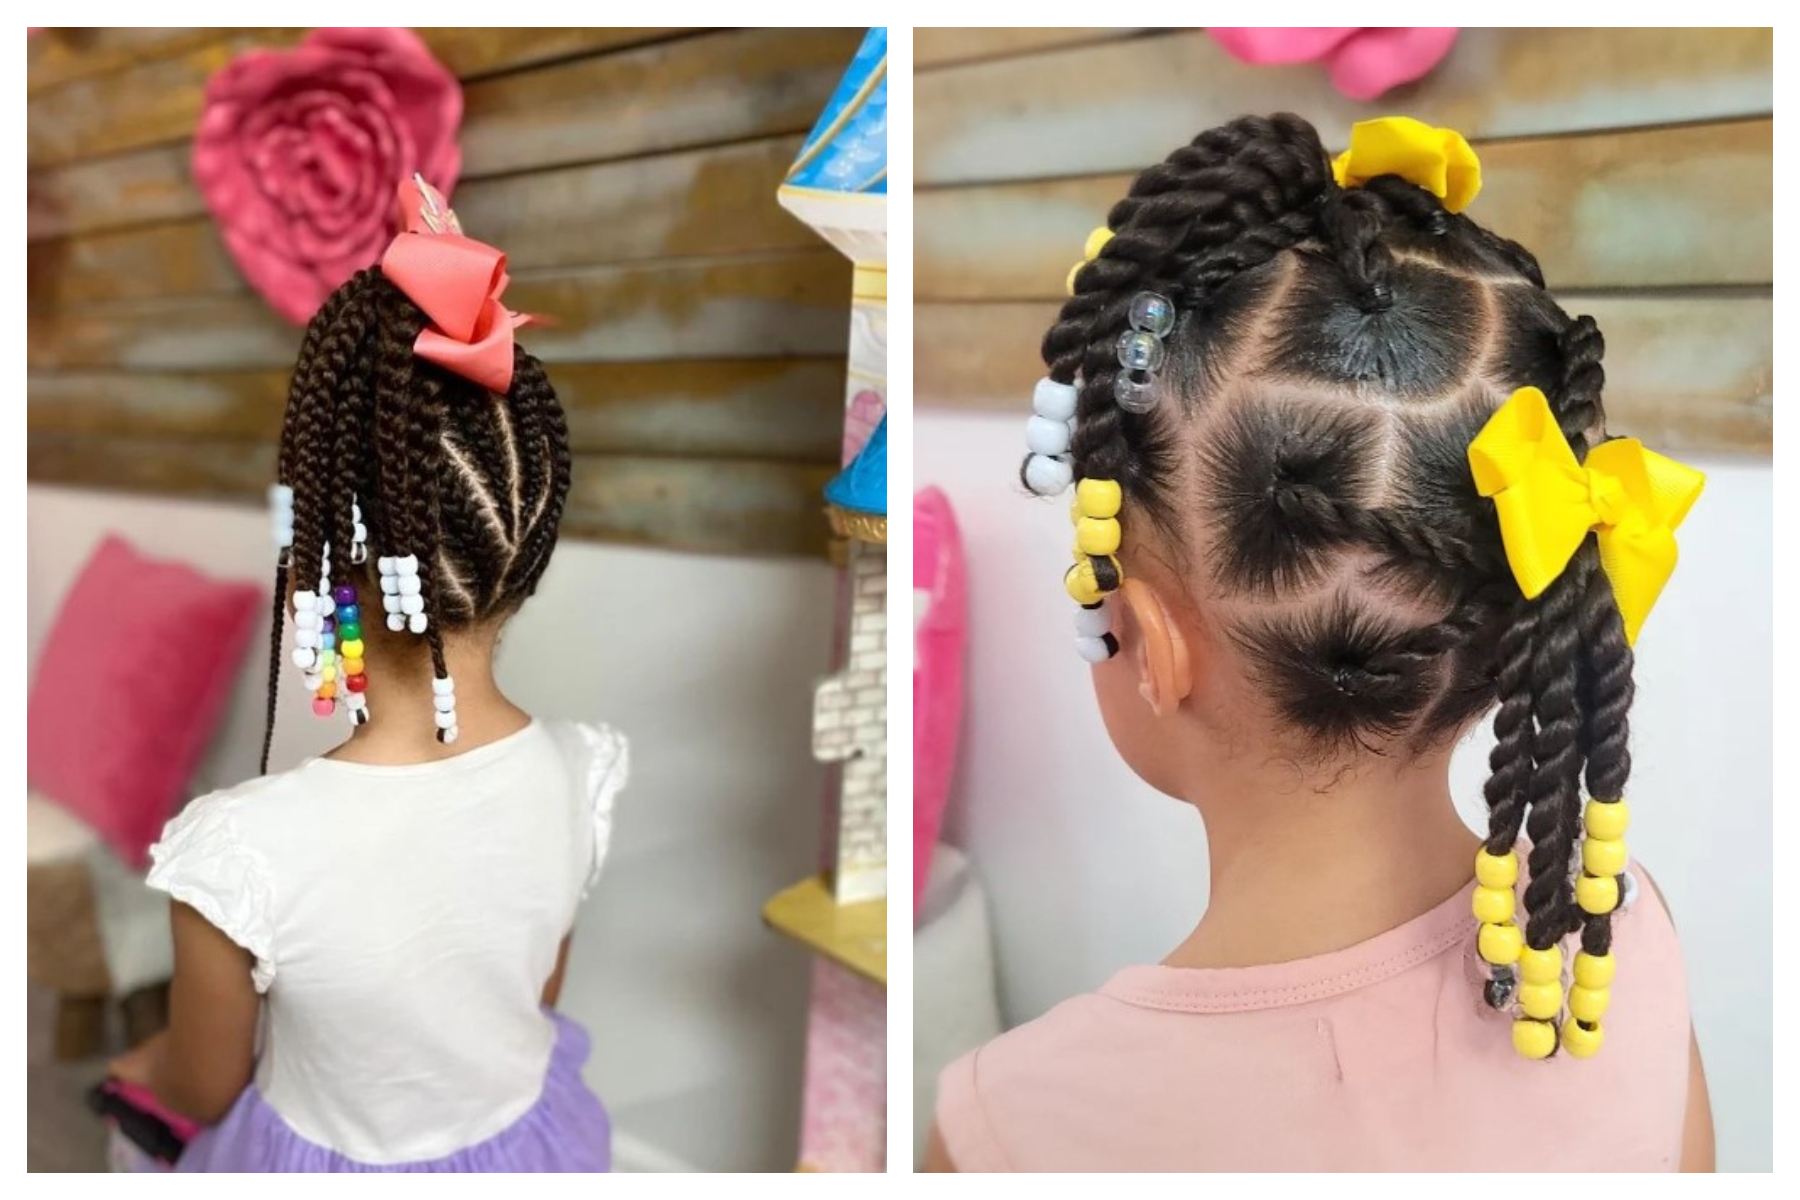 20 kids braid hairstyles trending right now that are absolutely gorgeous